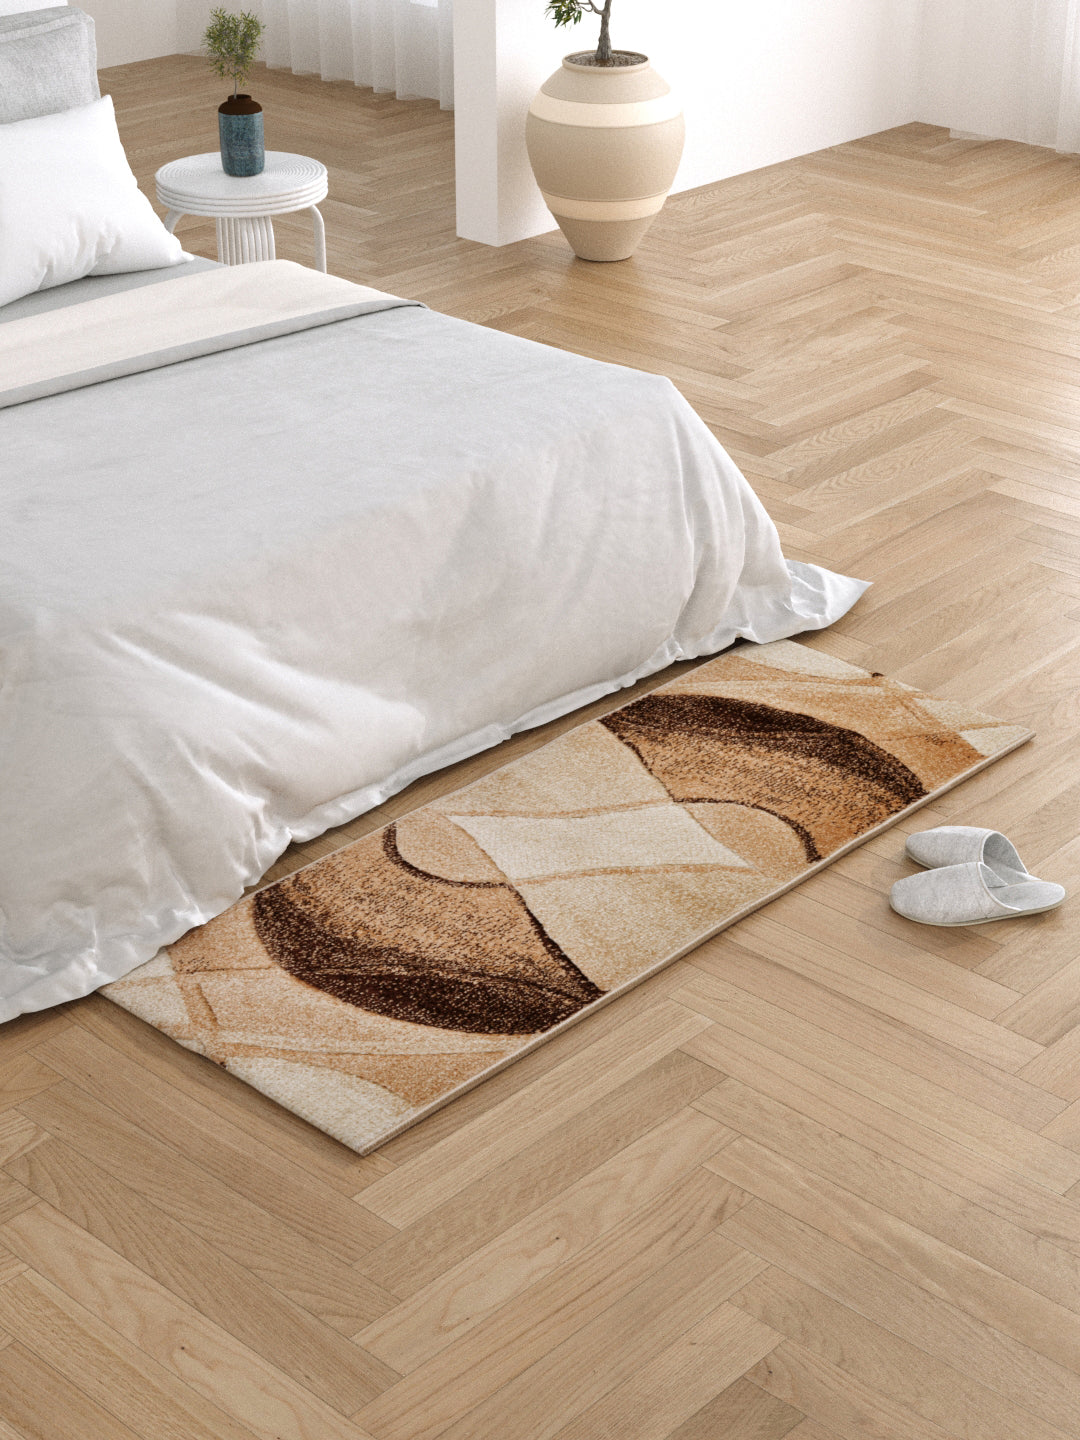 Bedside Runner Carpet Rug With Anti Skid Backing; 57x140 cms; Beige Brown Abstract